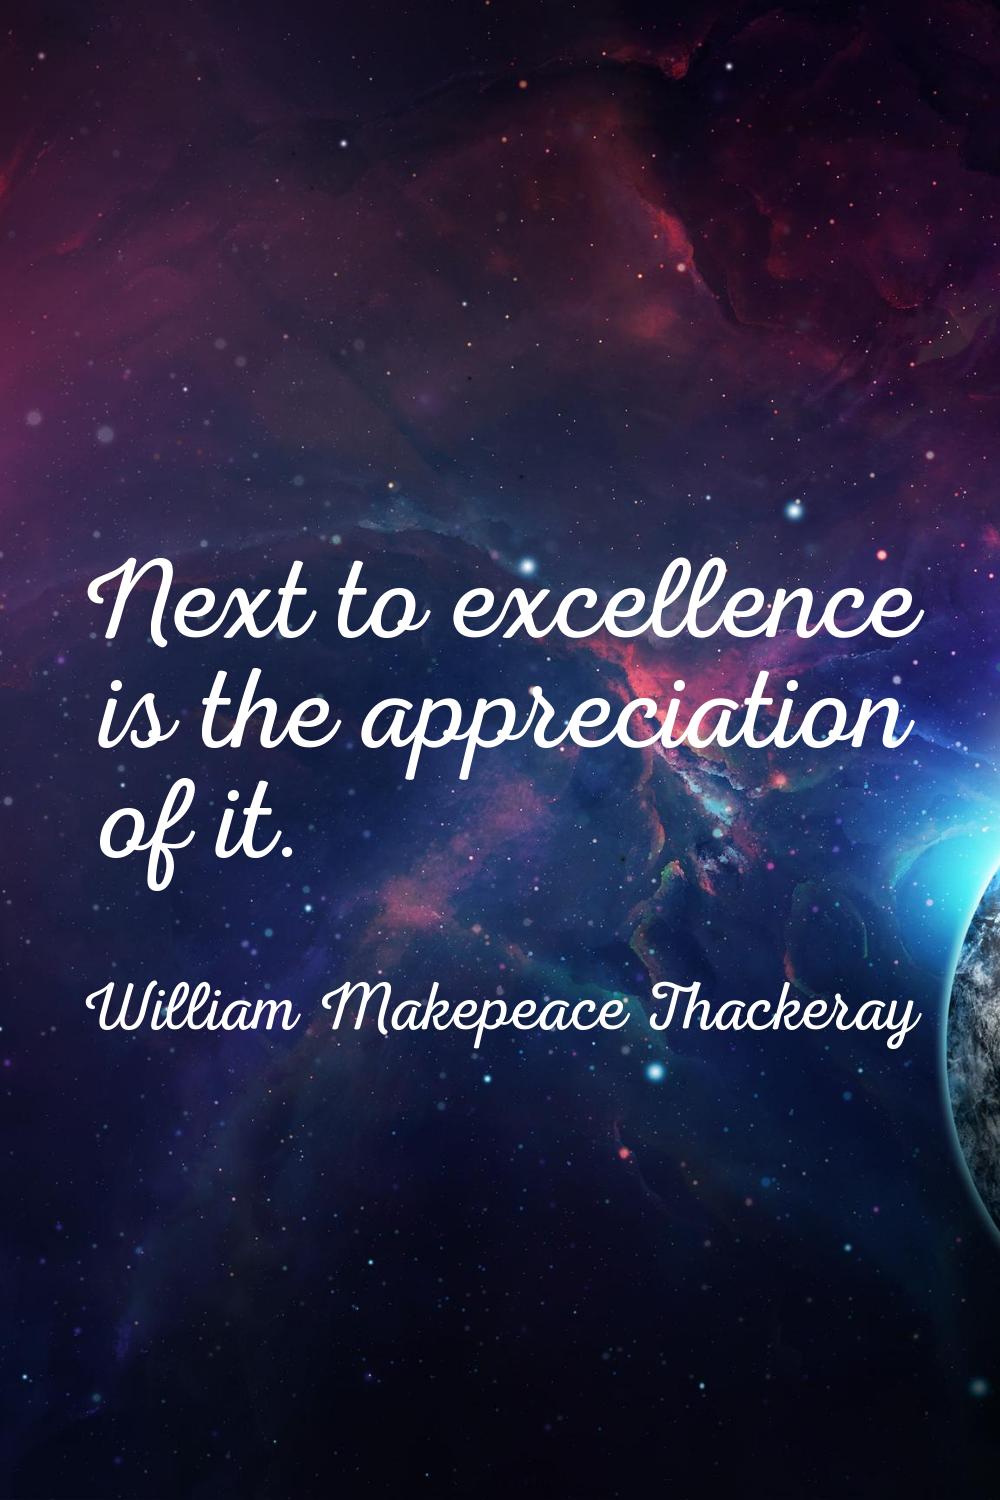 Next to excellence is the appreciation of it.